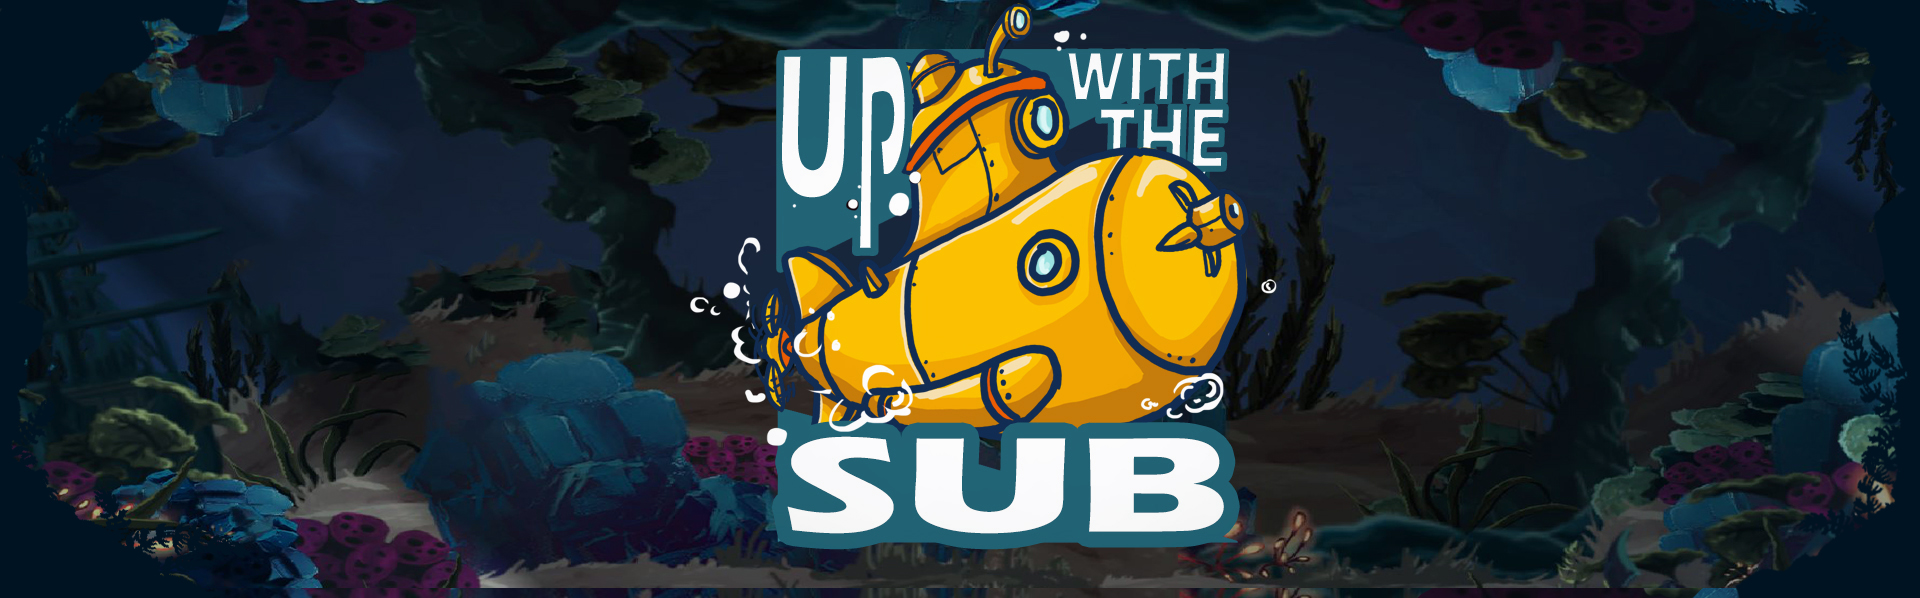 Up with the Sub!